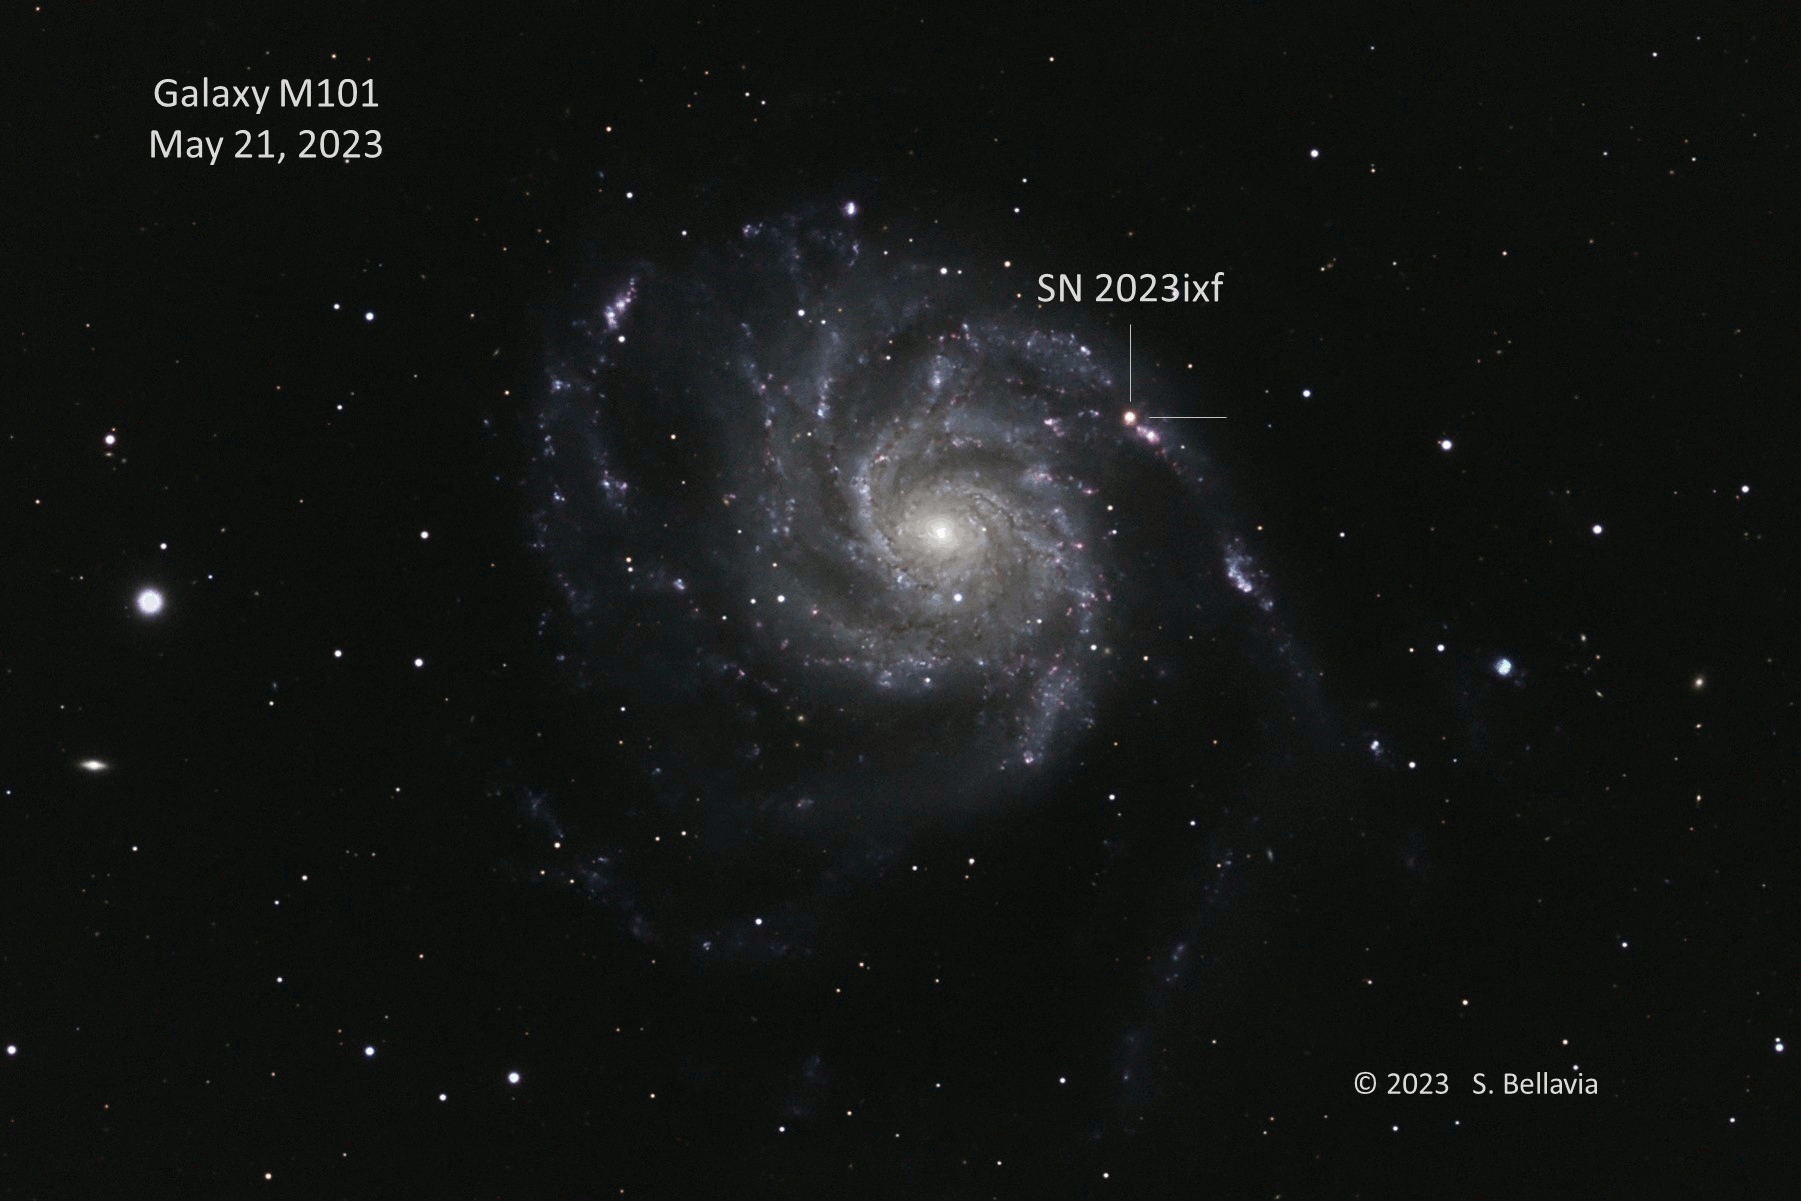 A pinwheel shaped bluish-white spiral galaxy against a black background with white stars sprinkled around